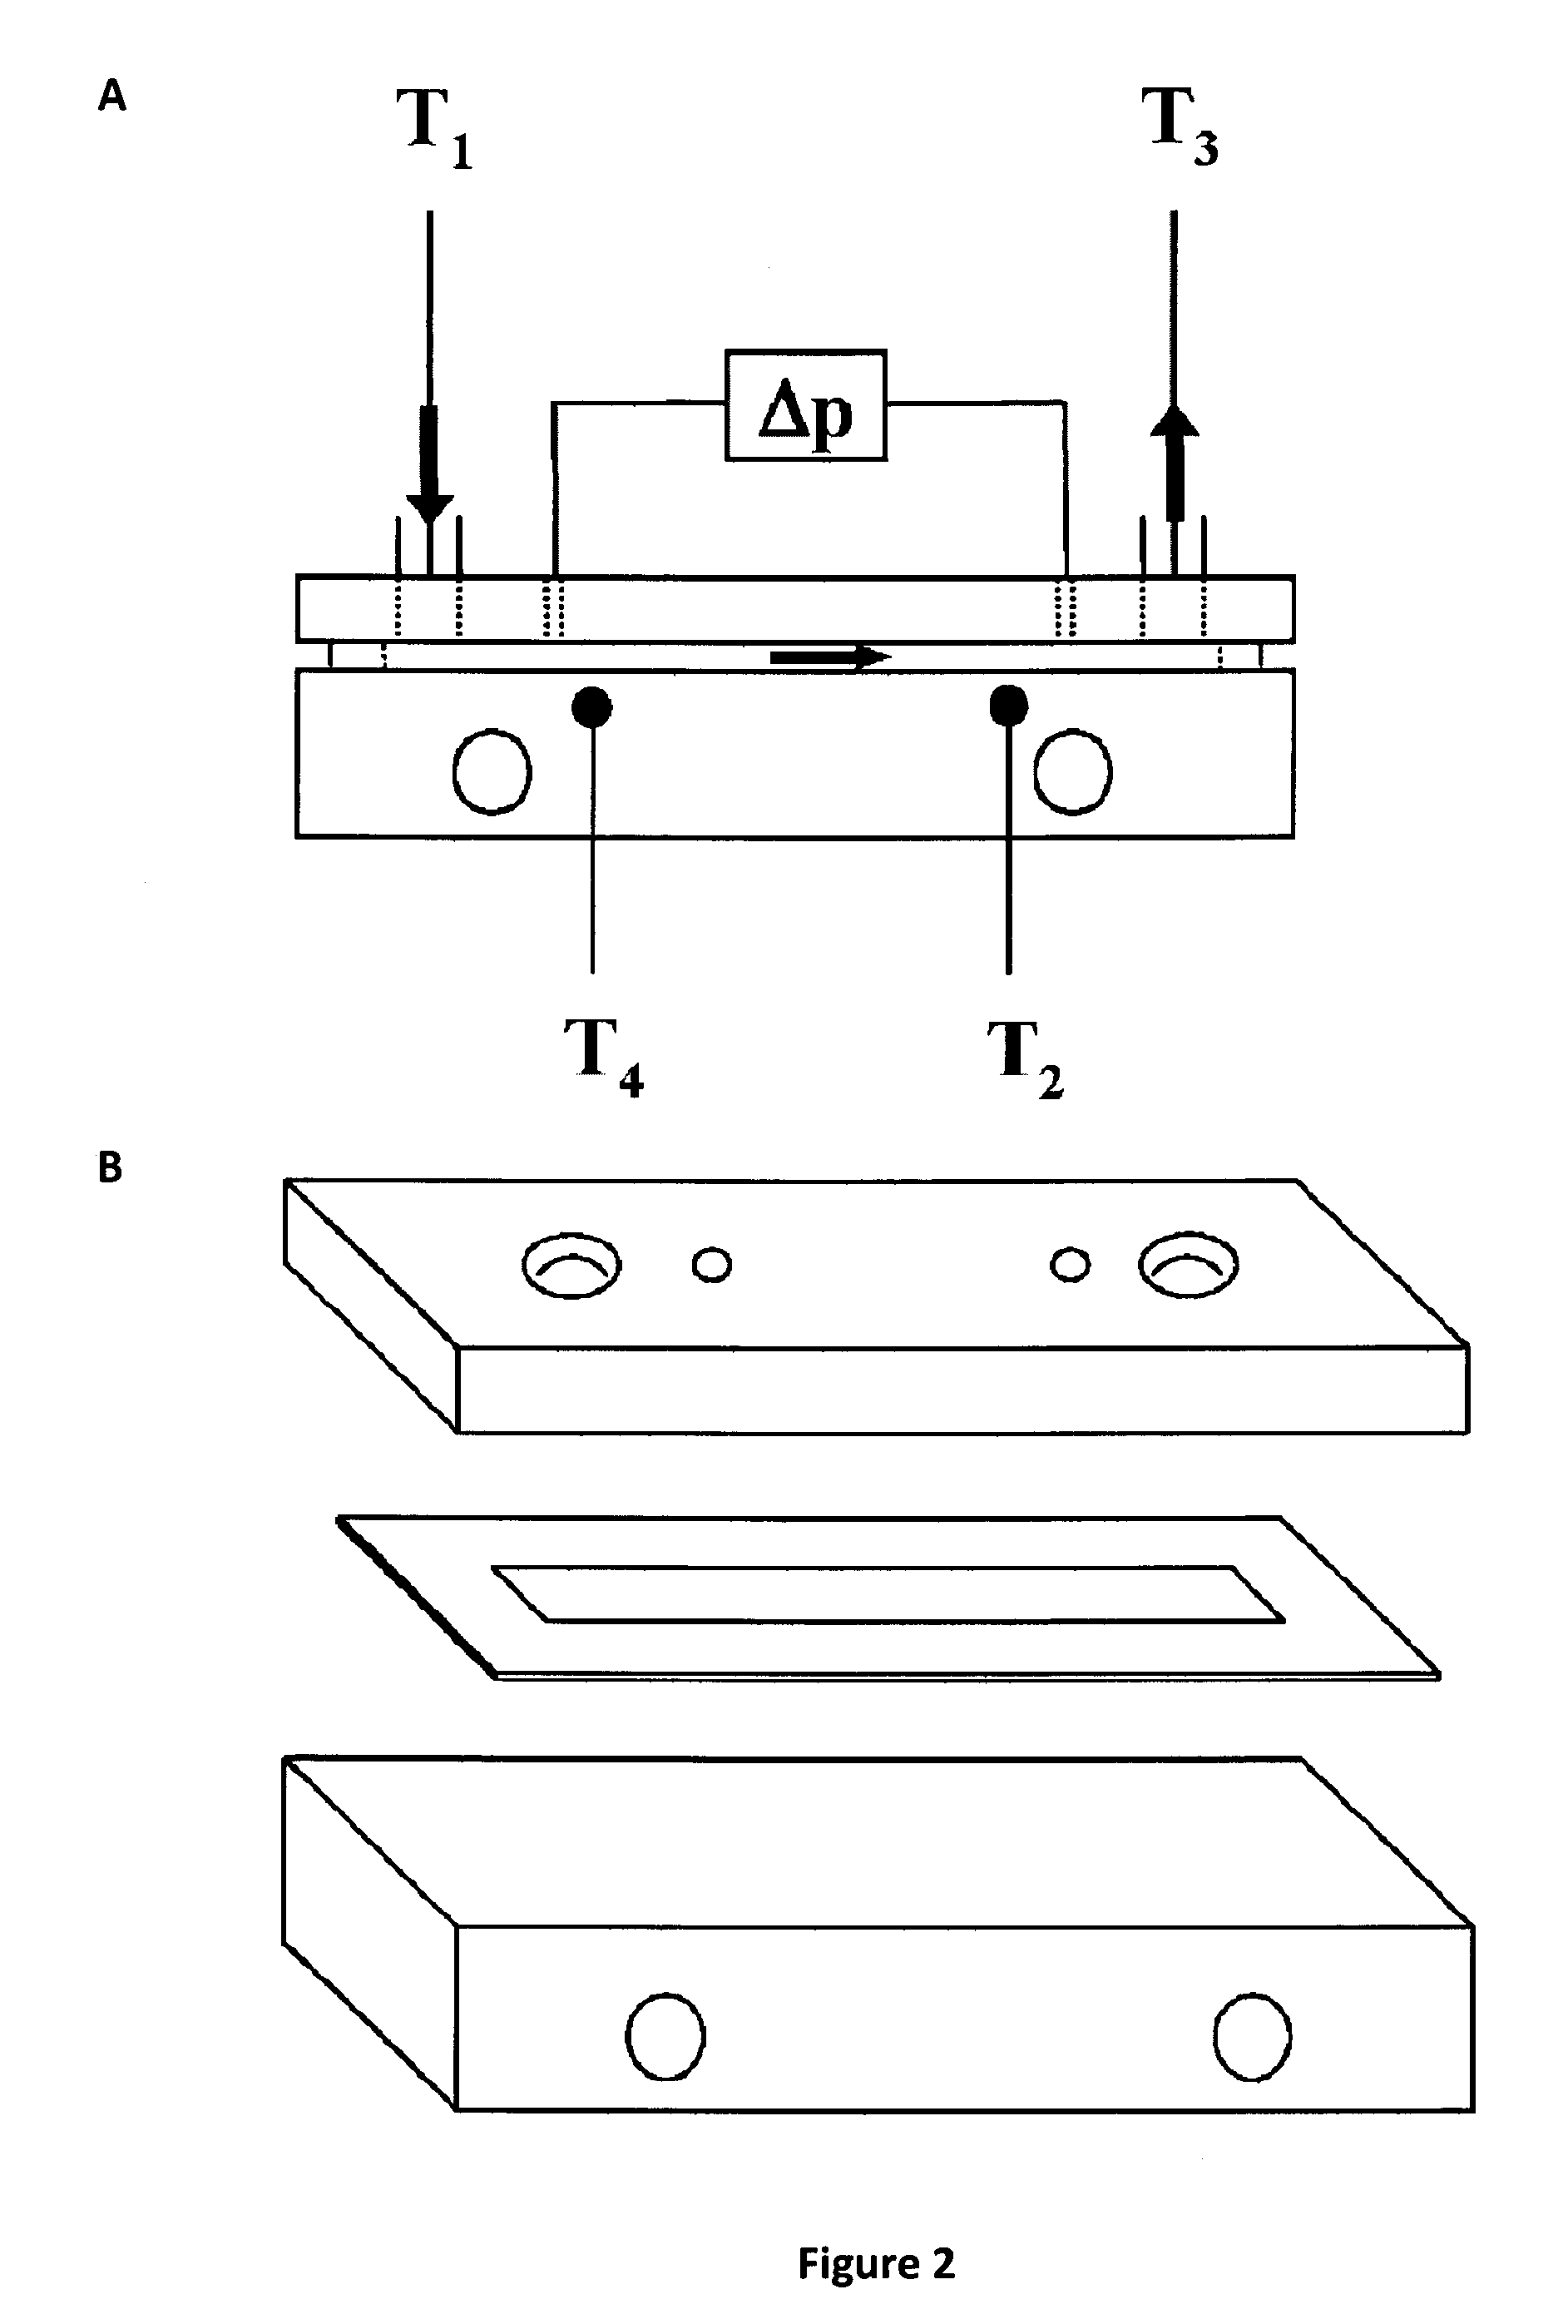 Methods for Testing the Effect of Polymer Additives on Wax Deposition from Crude Oils and Reducing Wax Deposition from Crude Oil During Pipeline Transmission